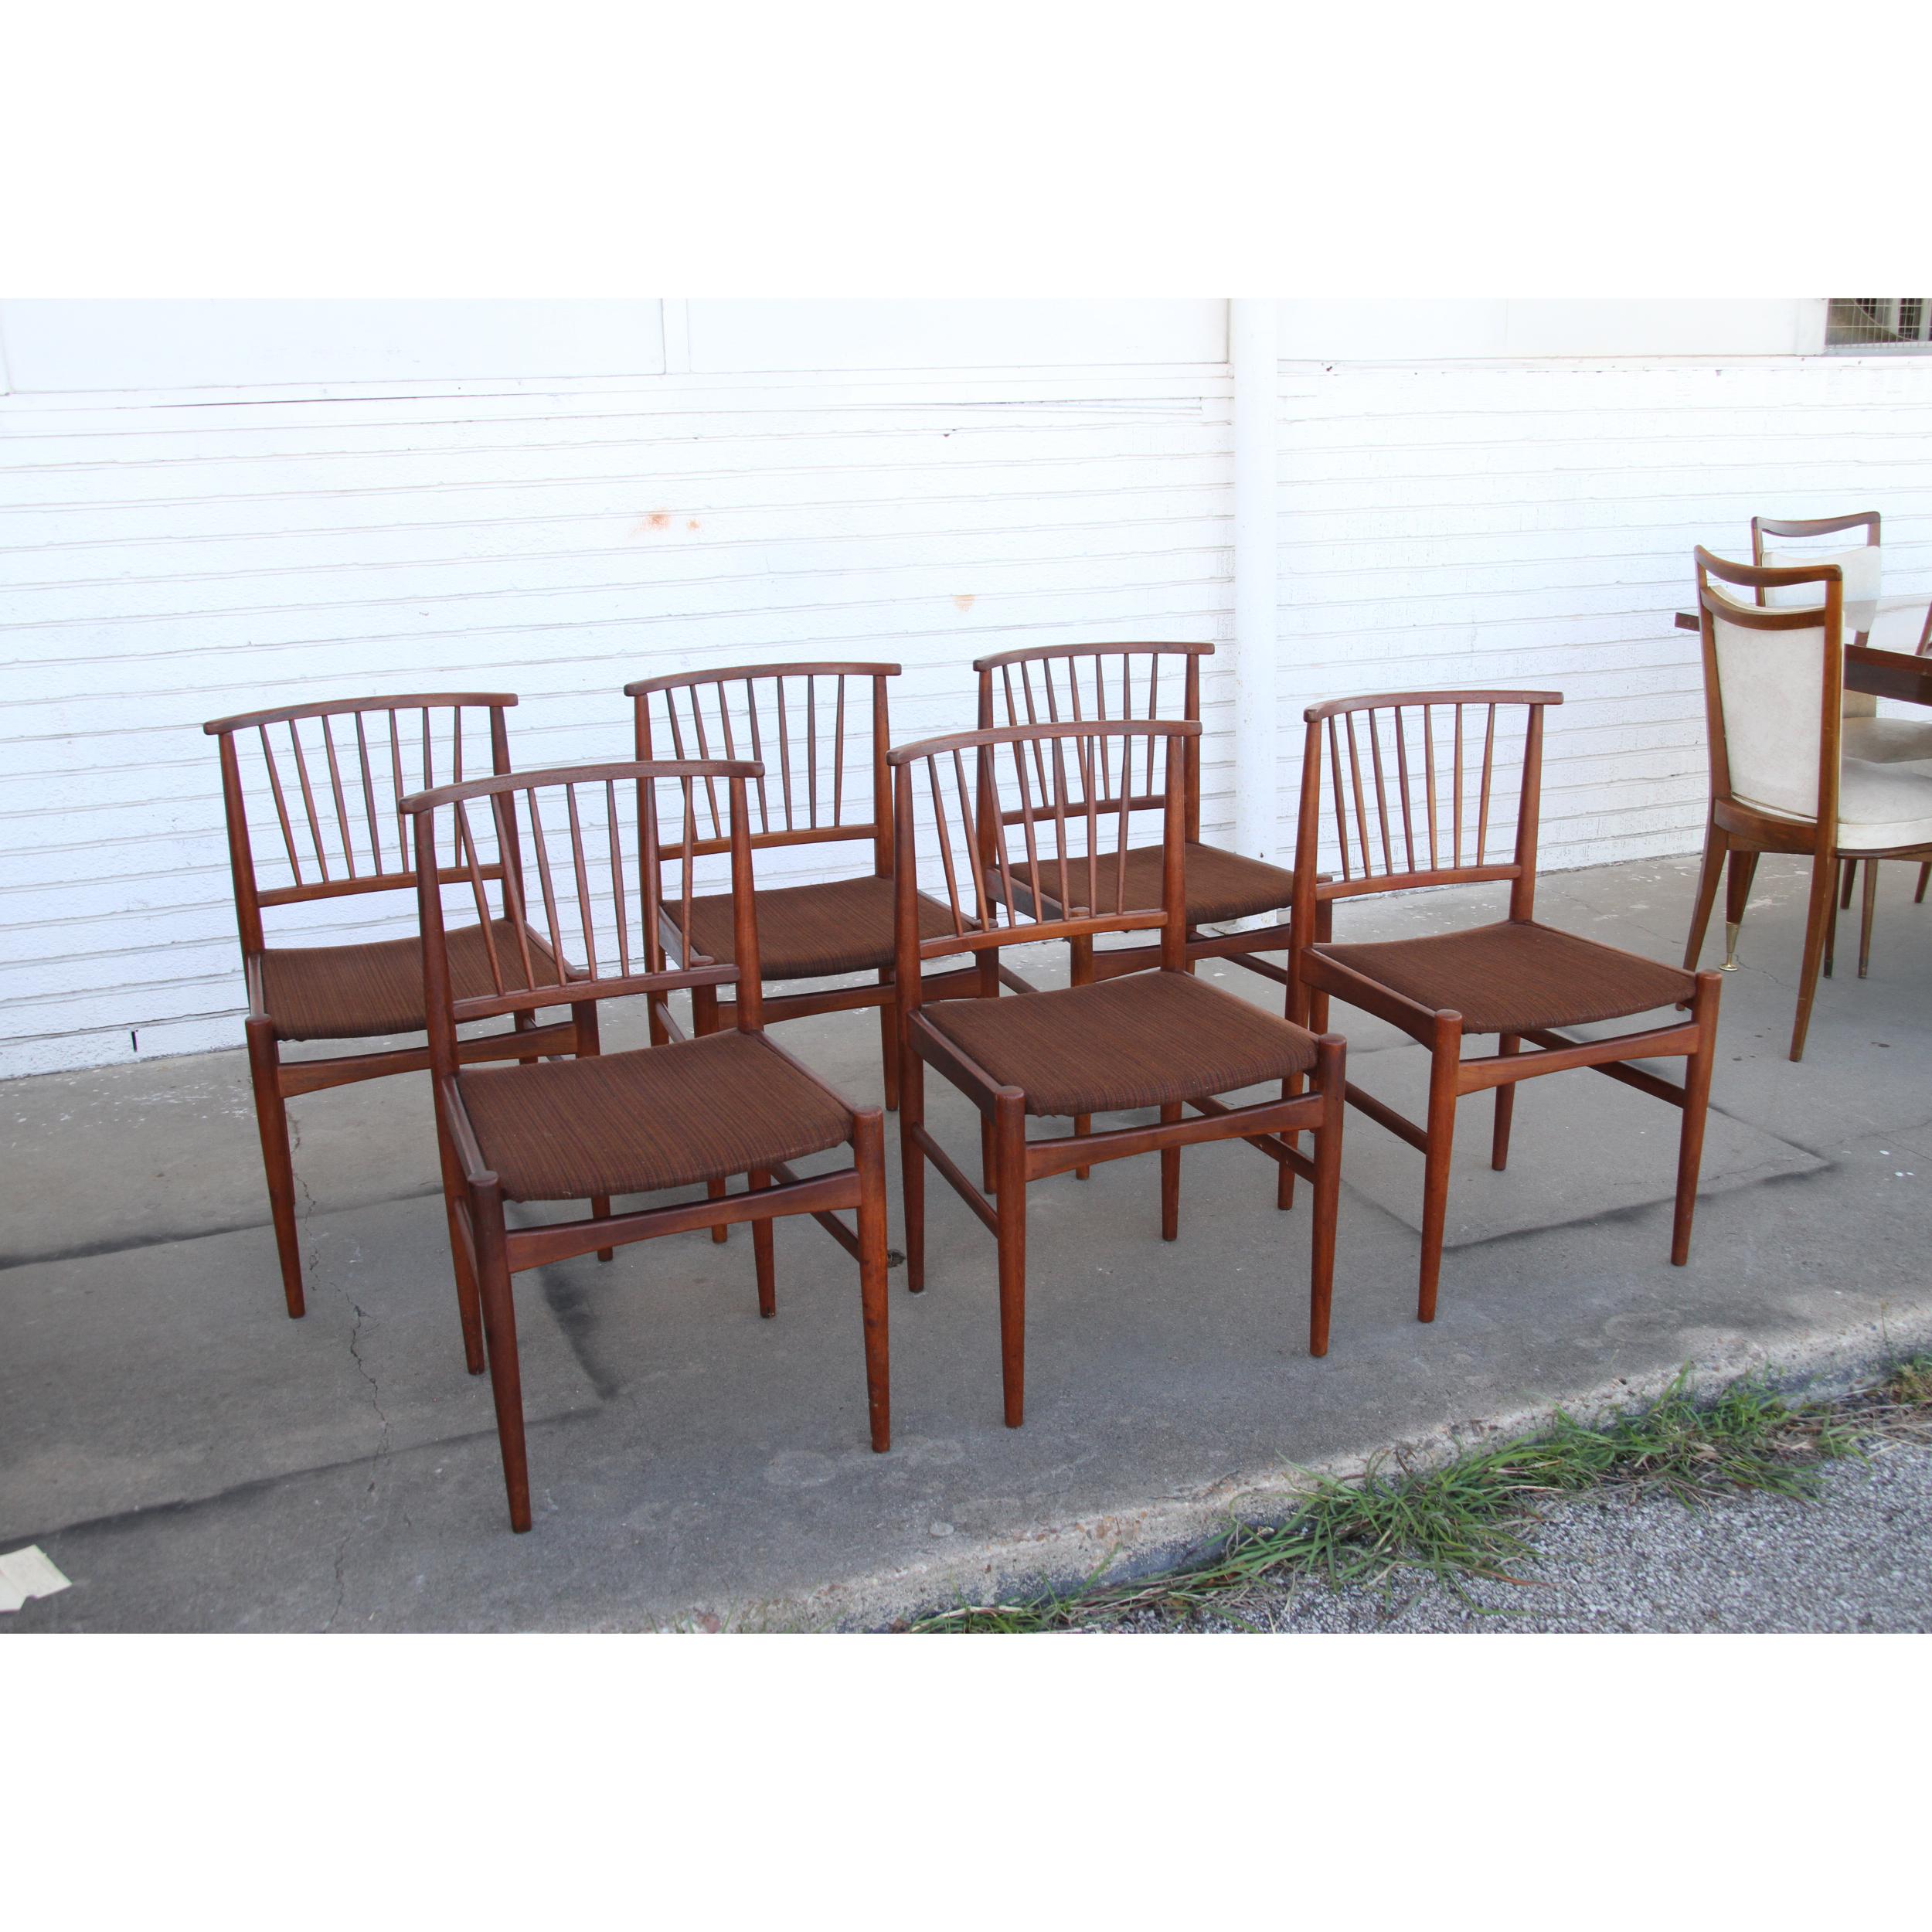 6 Dining chairs